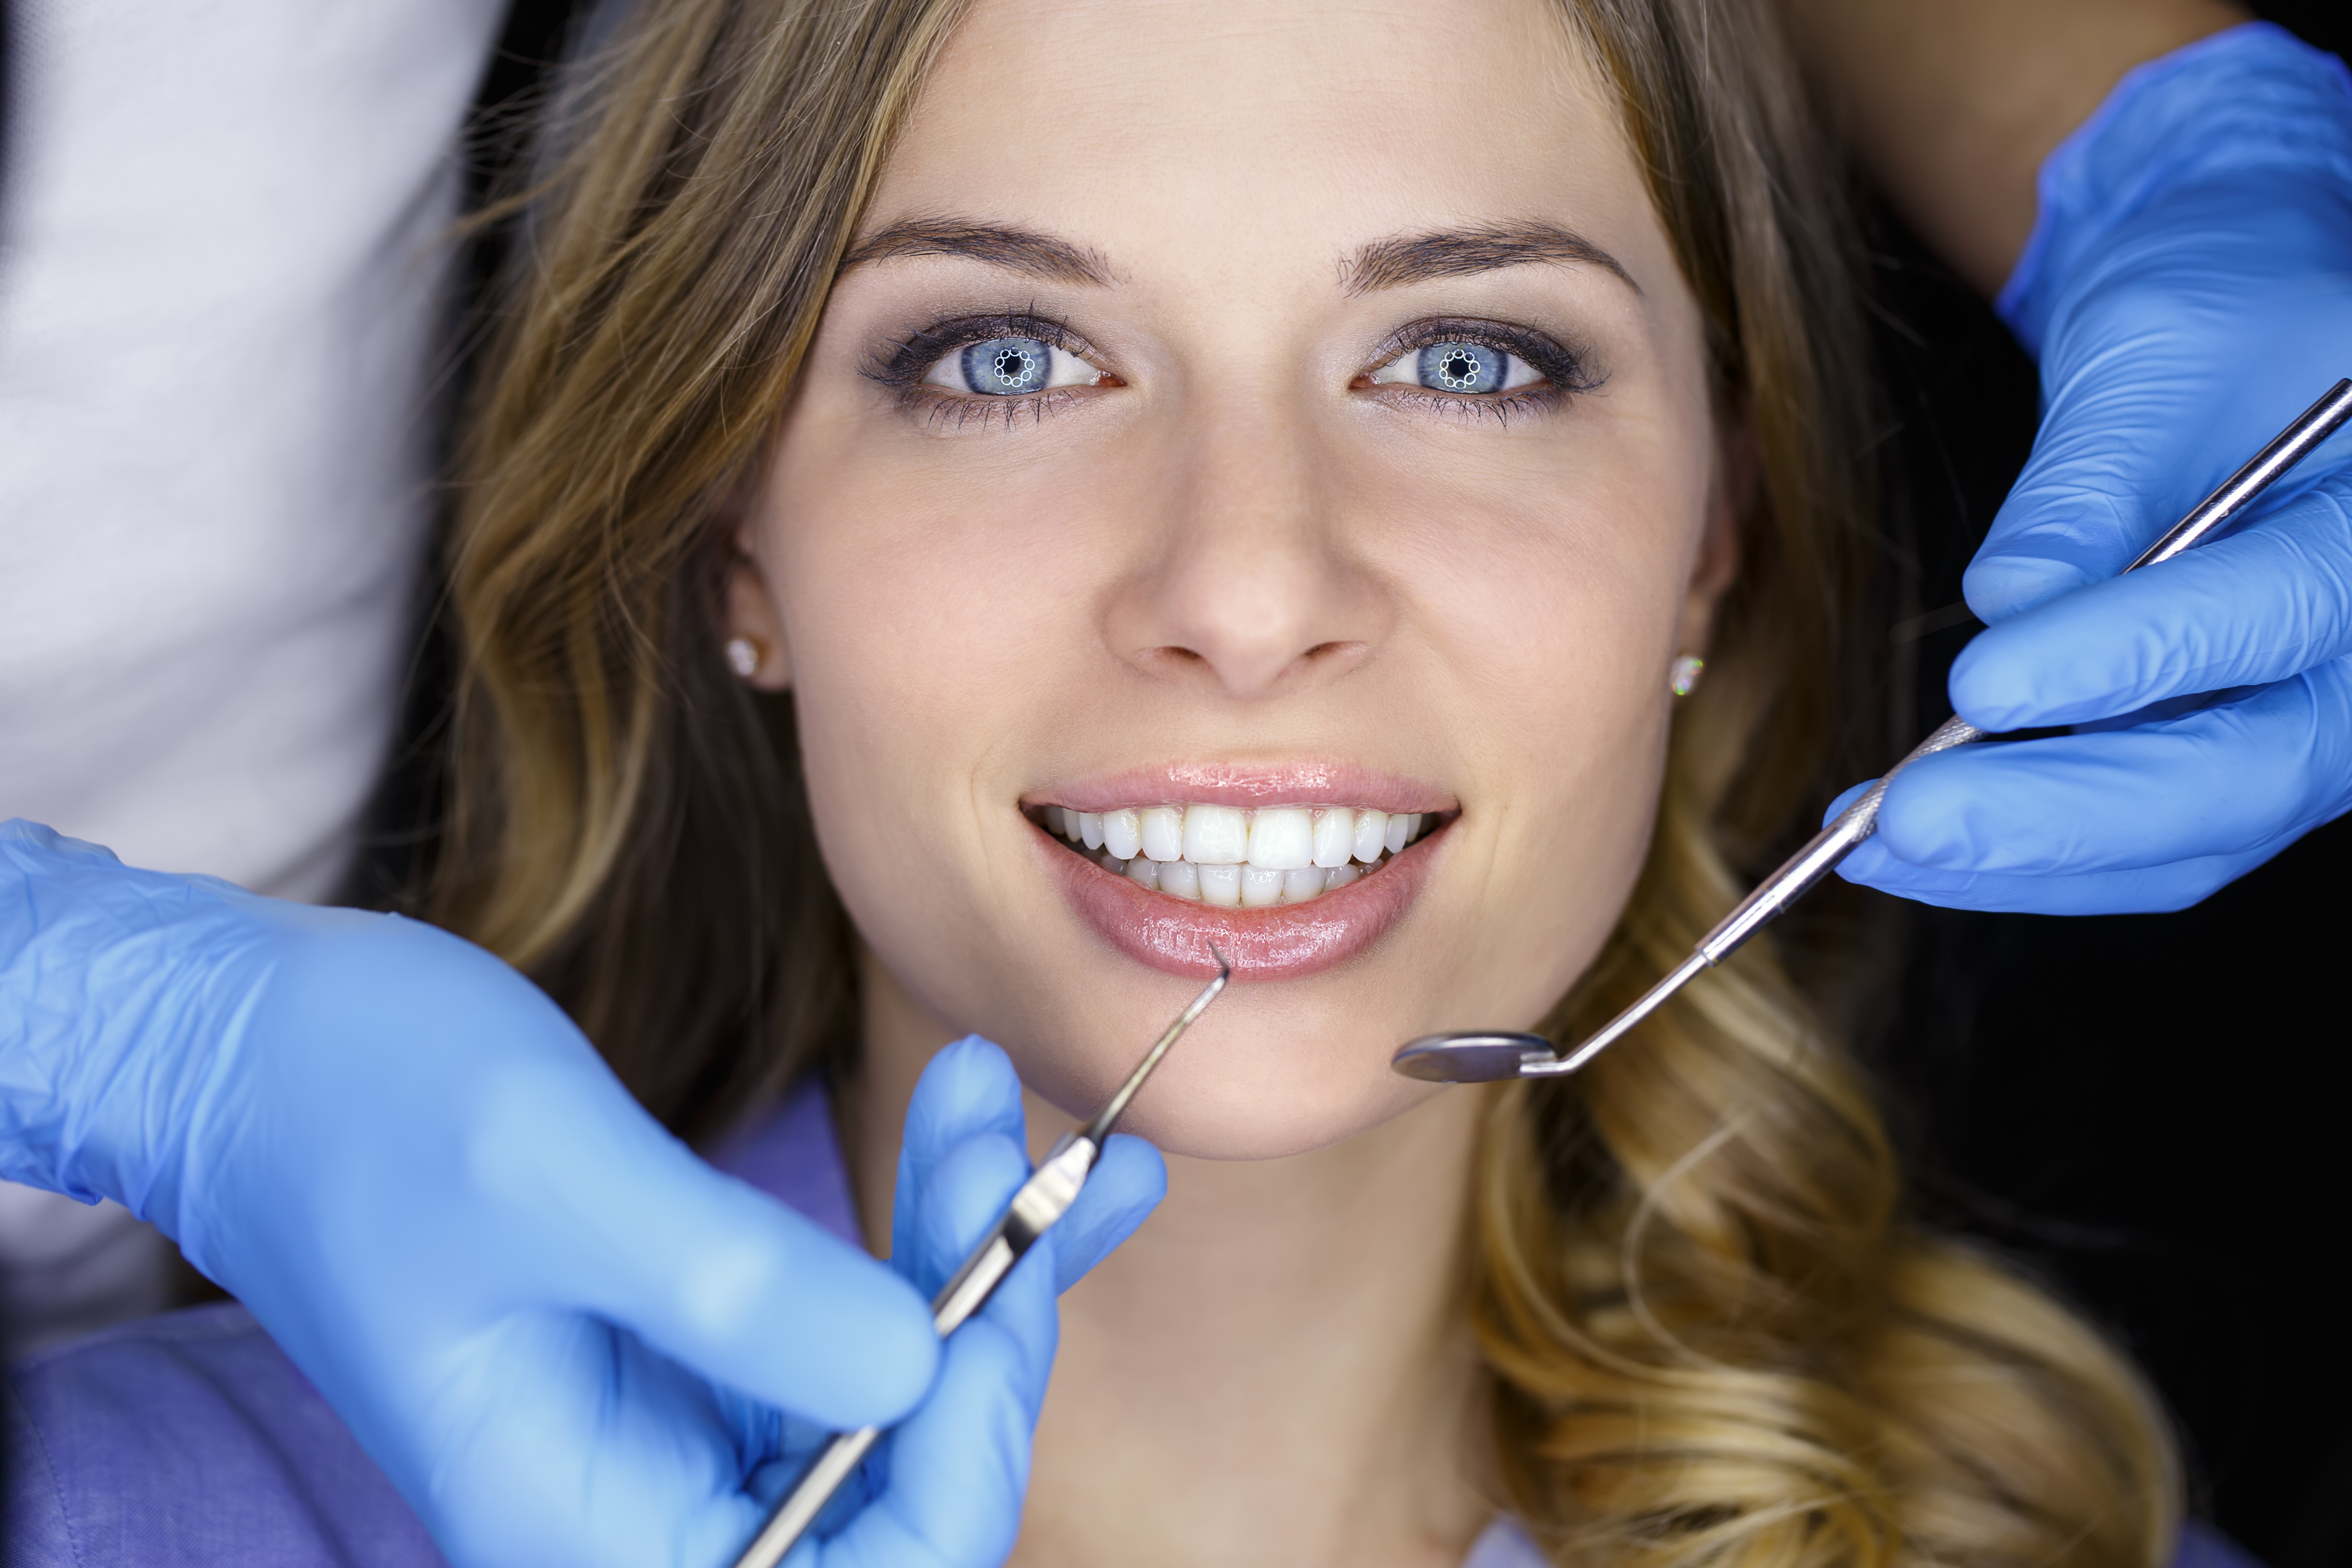 Smile With Confidence With Professional Teeth Whitening In Dublin